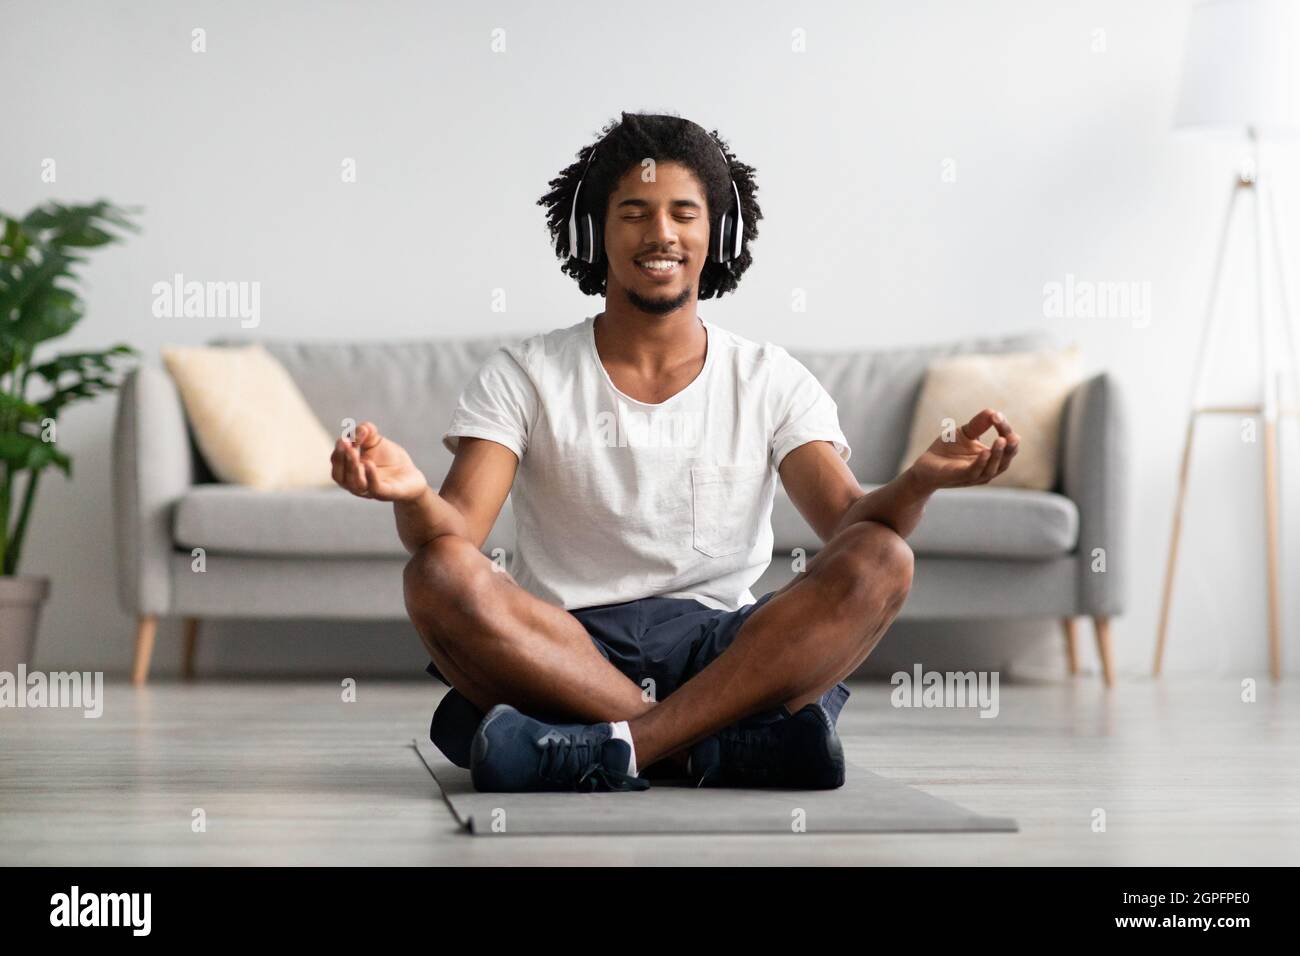 Meditation Concept. Calm Black Guy In Wireless Headphone Meditating At Home Stock Photo